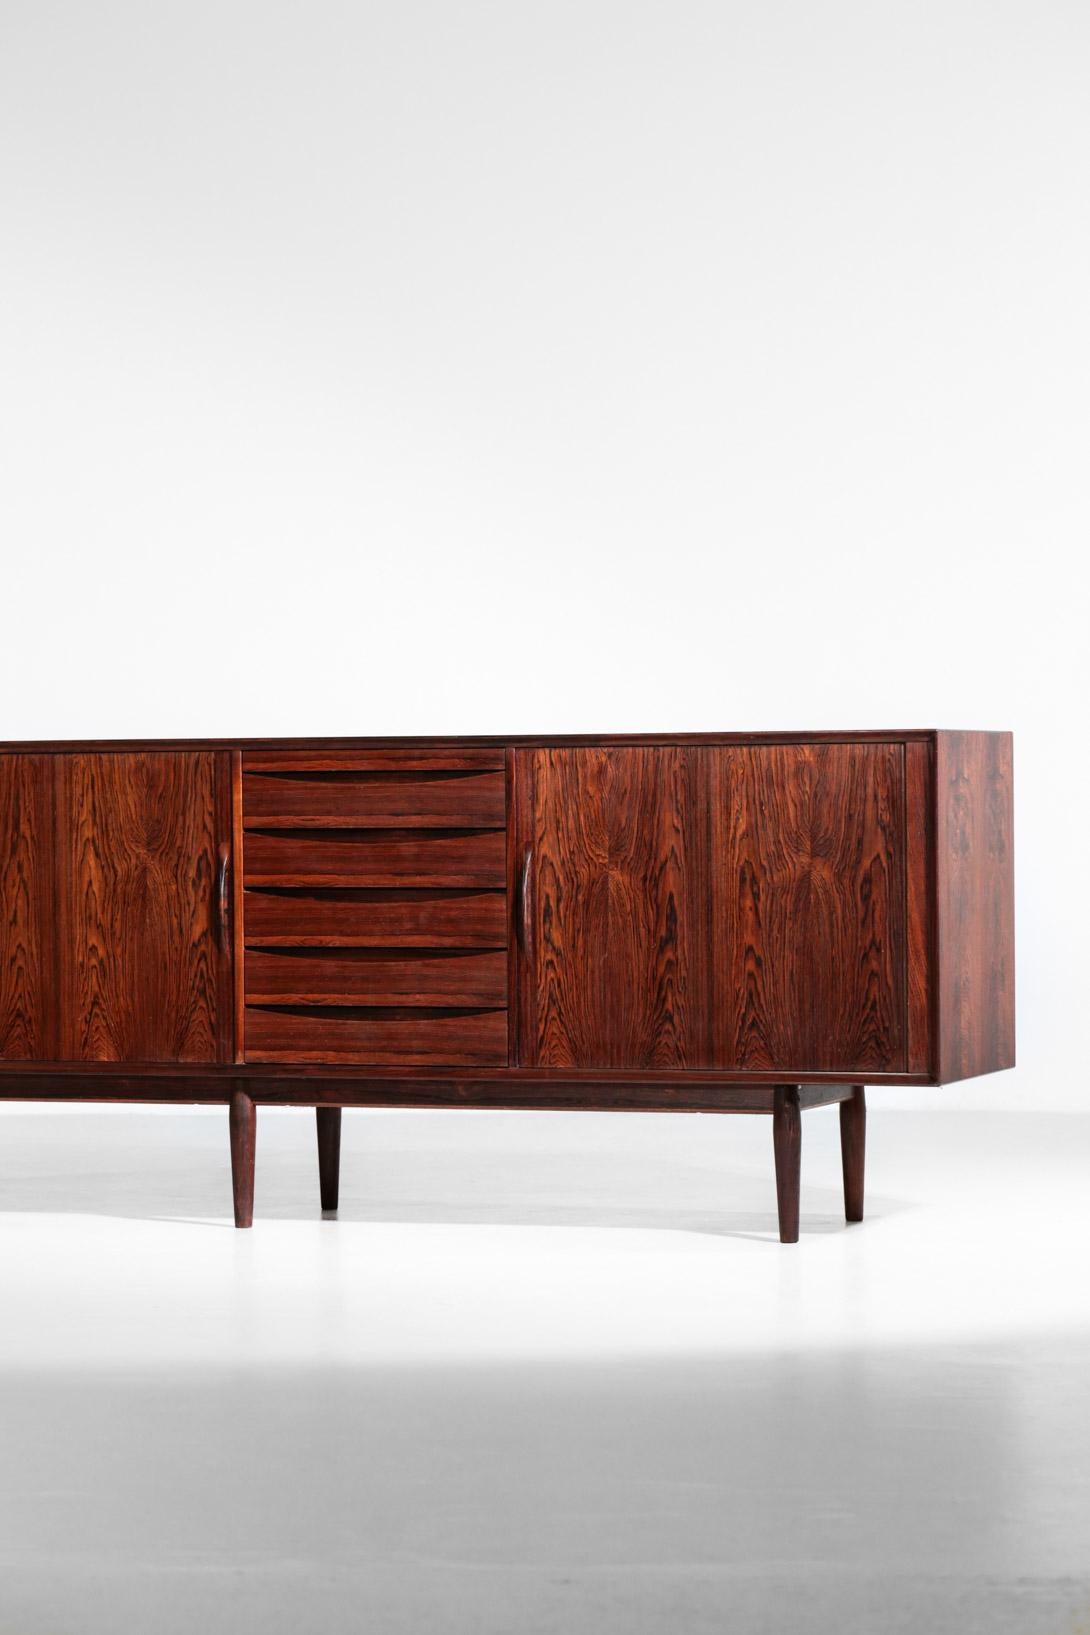 Large Arne Vodder sideboard, model 76 produced by Sibast. Rare model in rosewood from 1960s. Composed of 5 drawers, with 2 sliding doors on each side. Sculptural knobs in massive rosewood. Really high quality of manufacture.